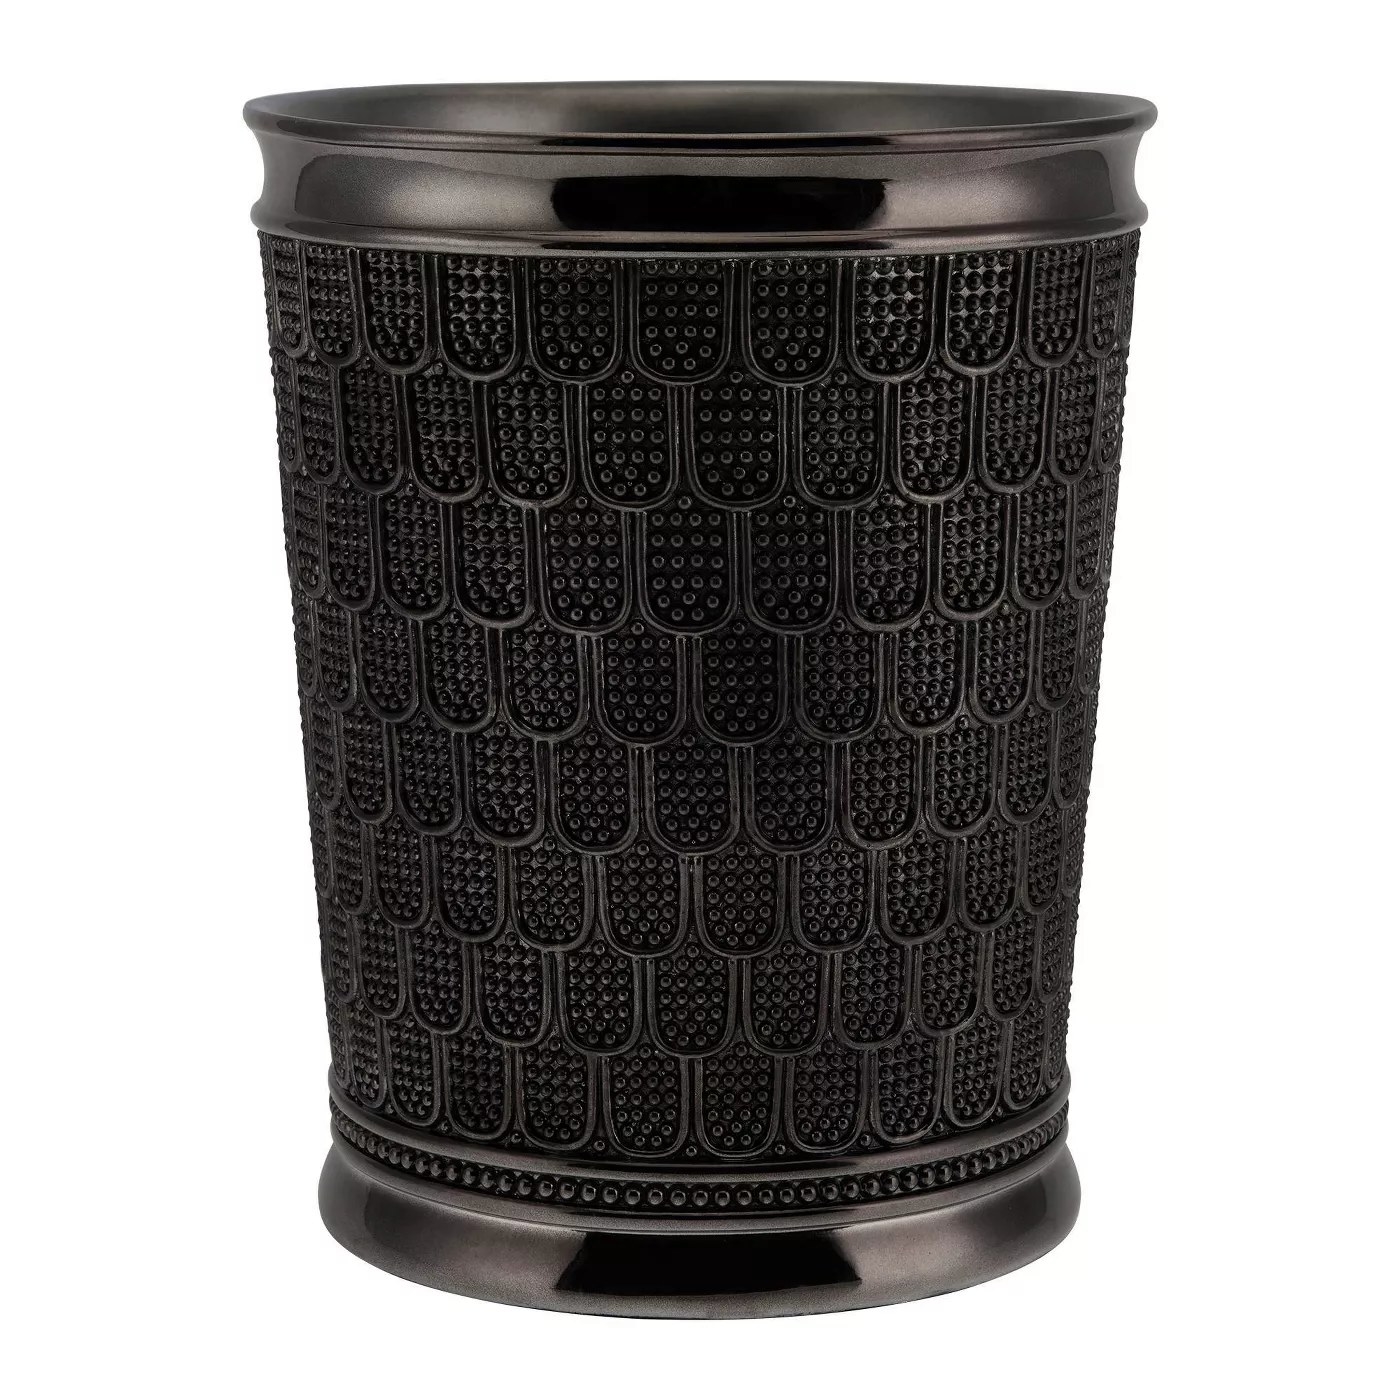 A black wastebasket with an embossed, beaded design